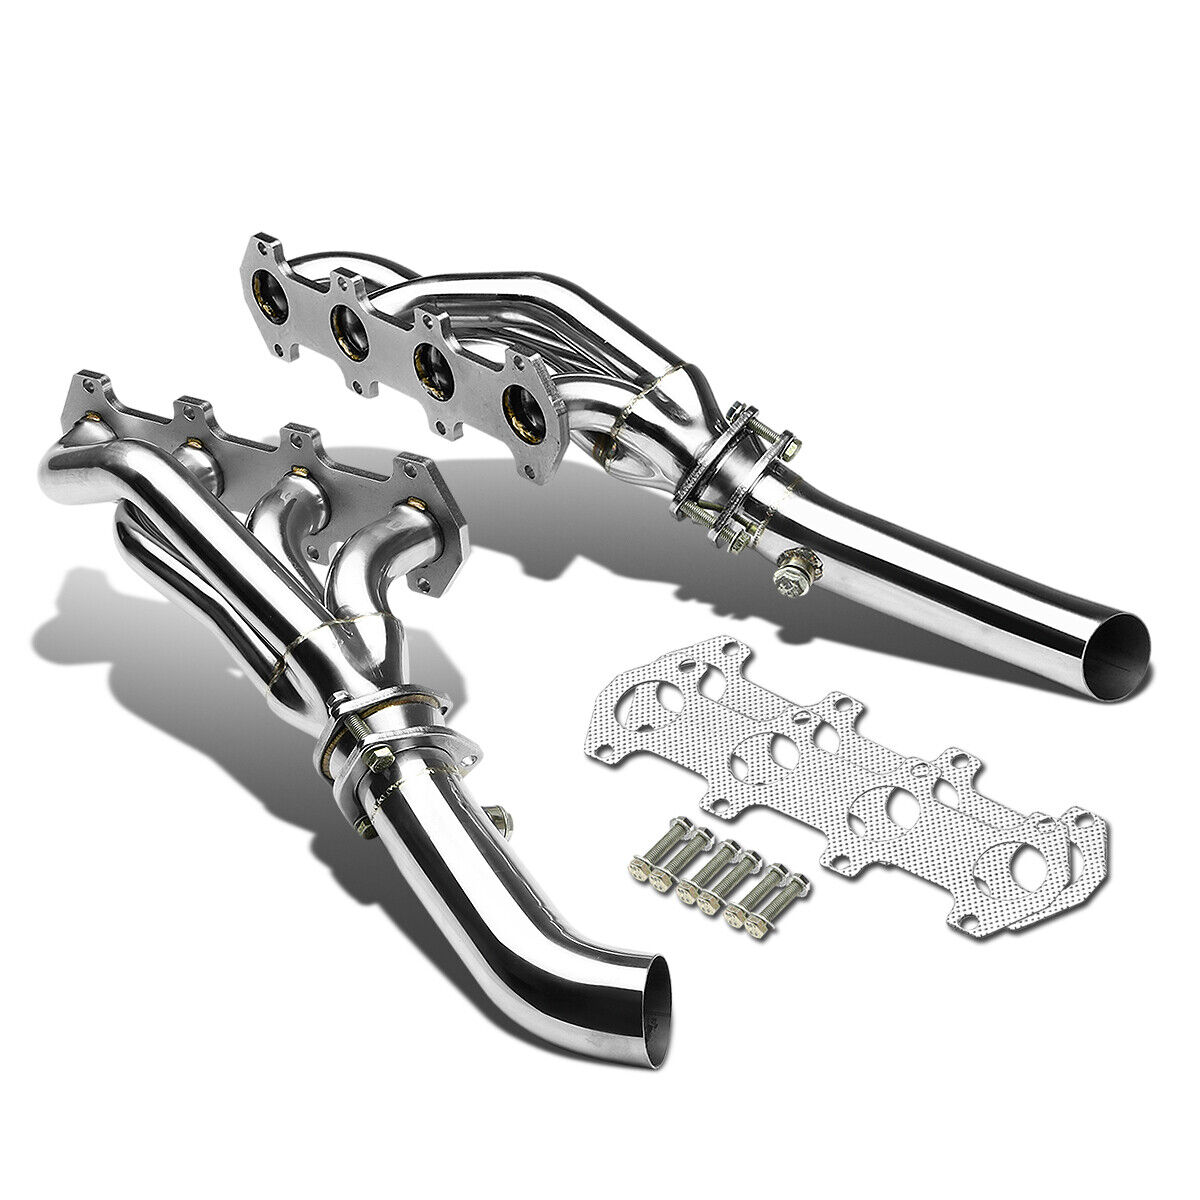 Fit 04-10 Ford F150 5.4 Stainless Steel Racing Header Exhaust Manifold+Mid Pipe